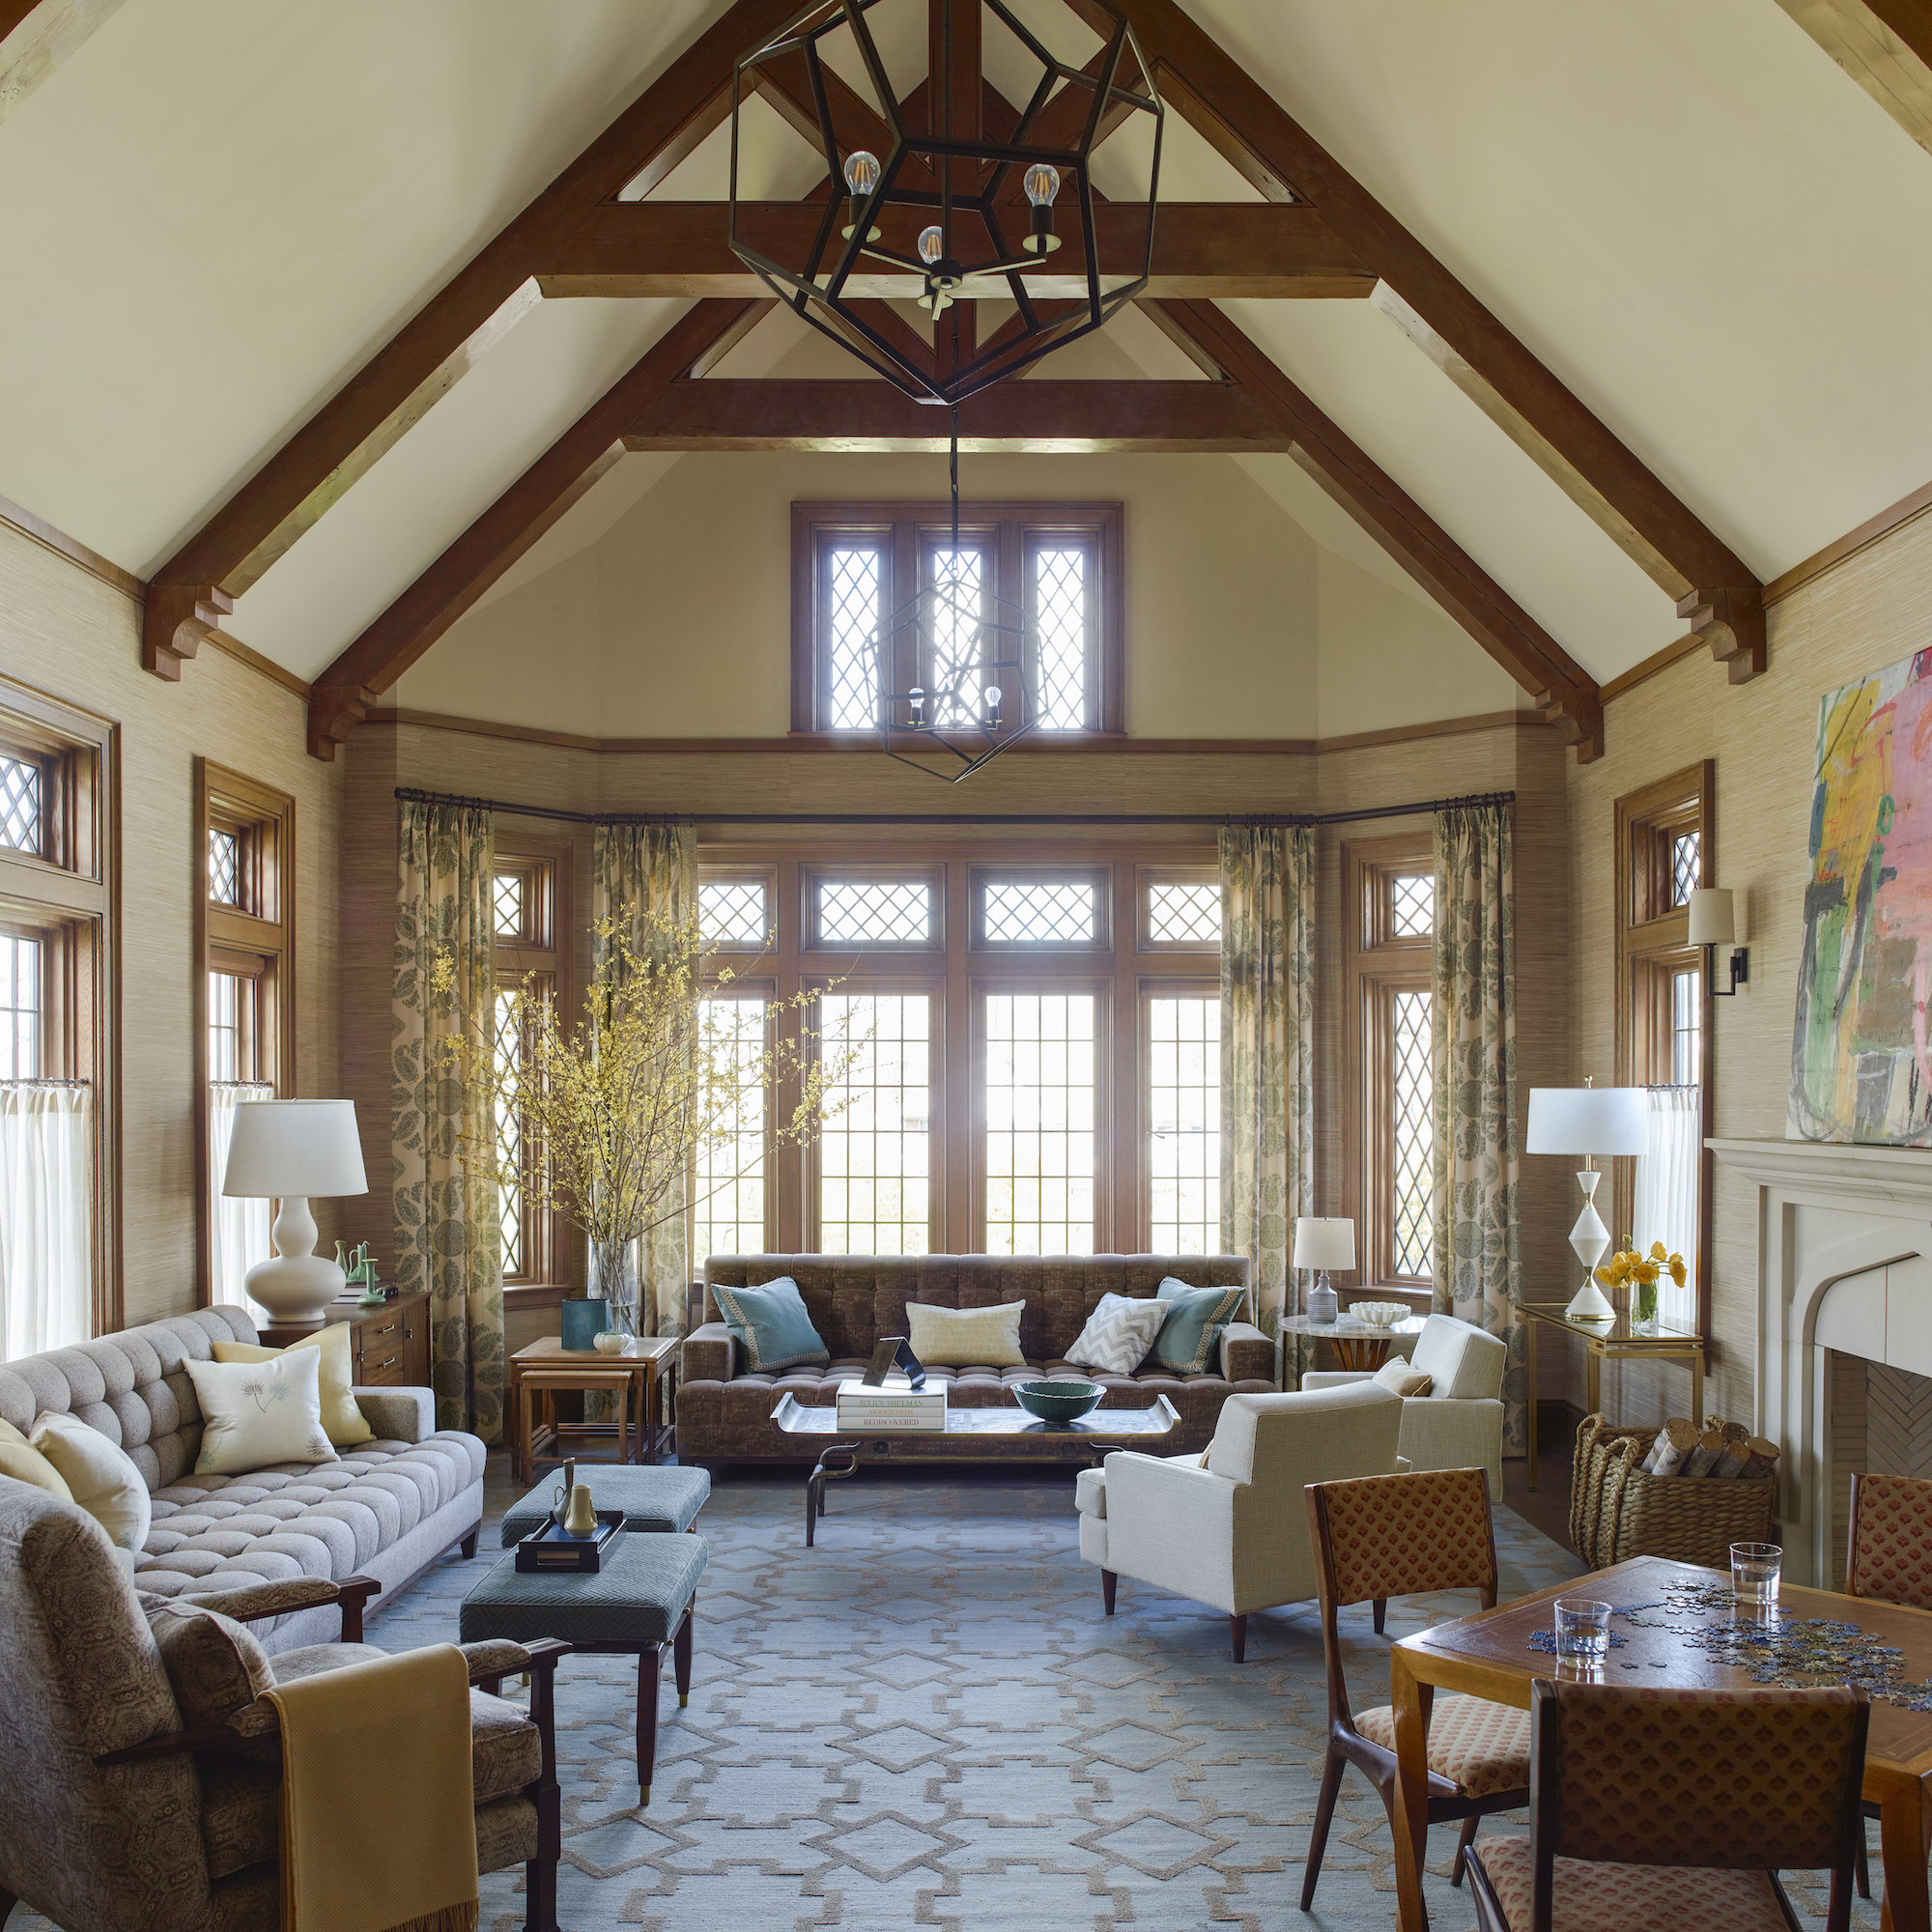 Westchester house interior designed by Gideon Mendelson in Effect Magazine